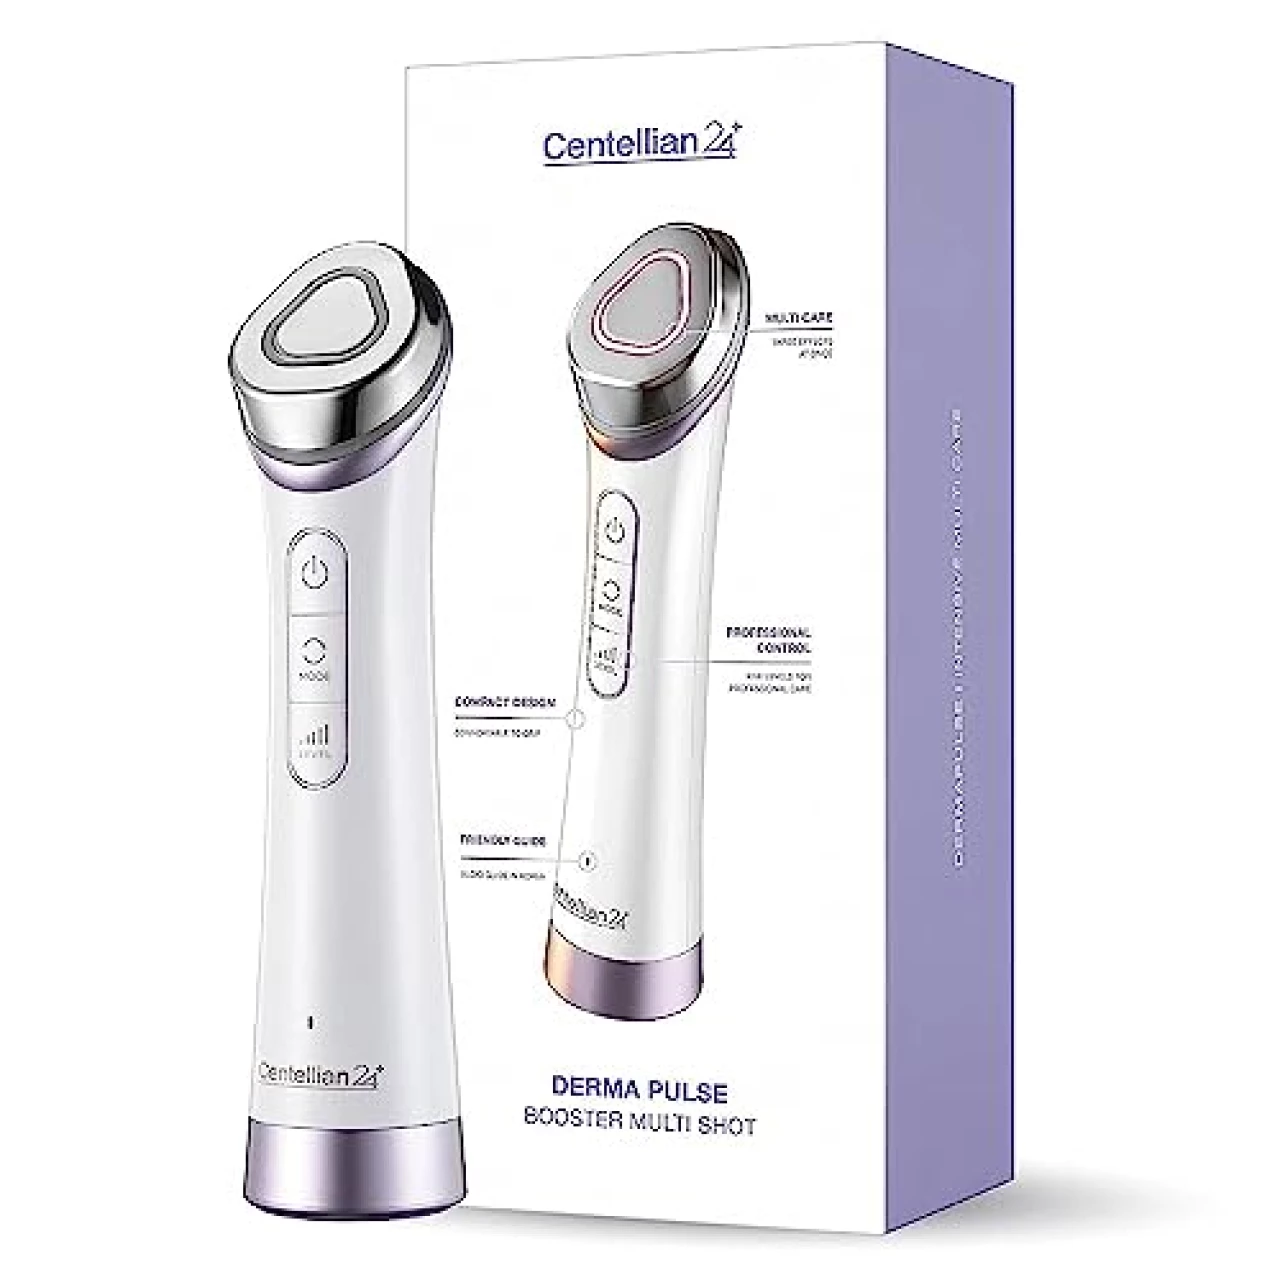 Centellian 24 Madeca Prime Facial Toning Device - 3-in-1 Korean Microcurrent Facial Device by Dongkook. Premium Face Massager for Even Skin Tone, Elasticity &amp; Wrinkles